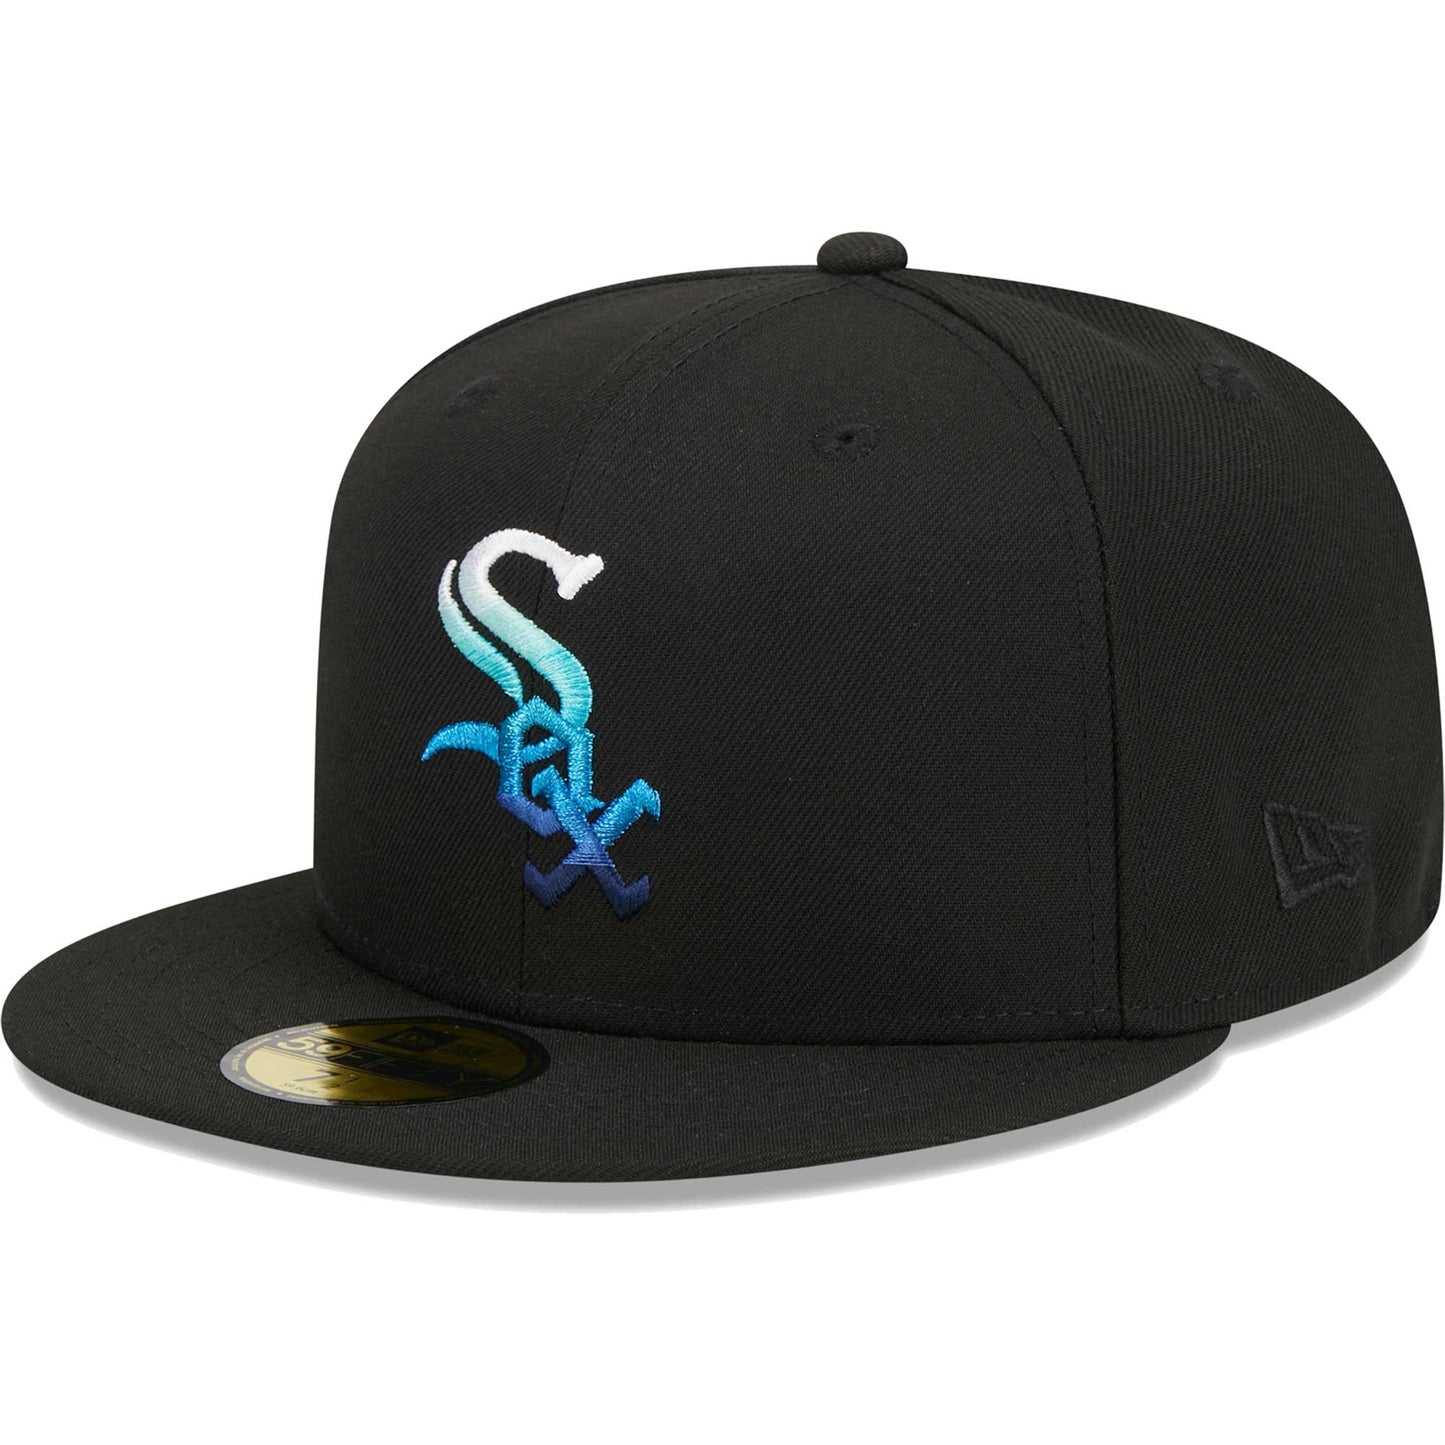 Chicago White Sox New Era Metallic Gradient 59FIFTY Fitted Hat - Black